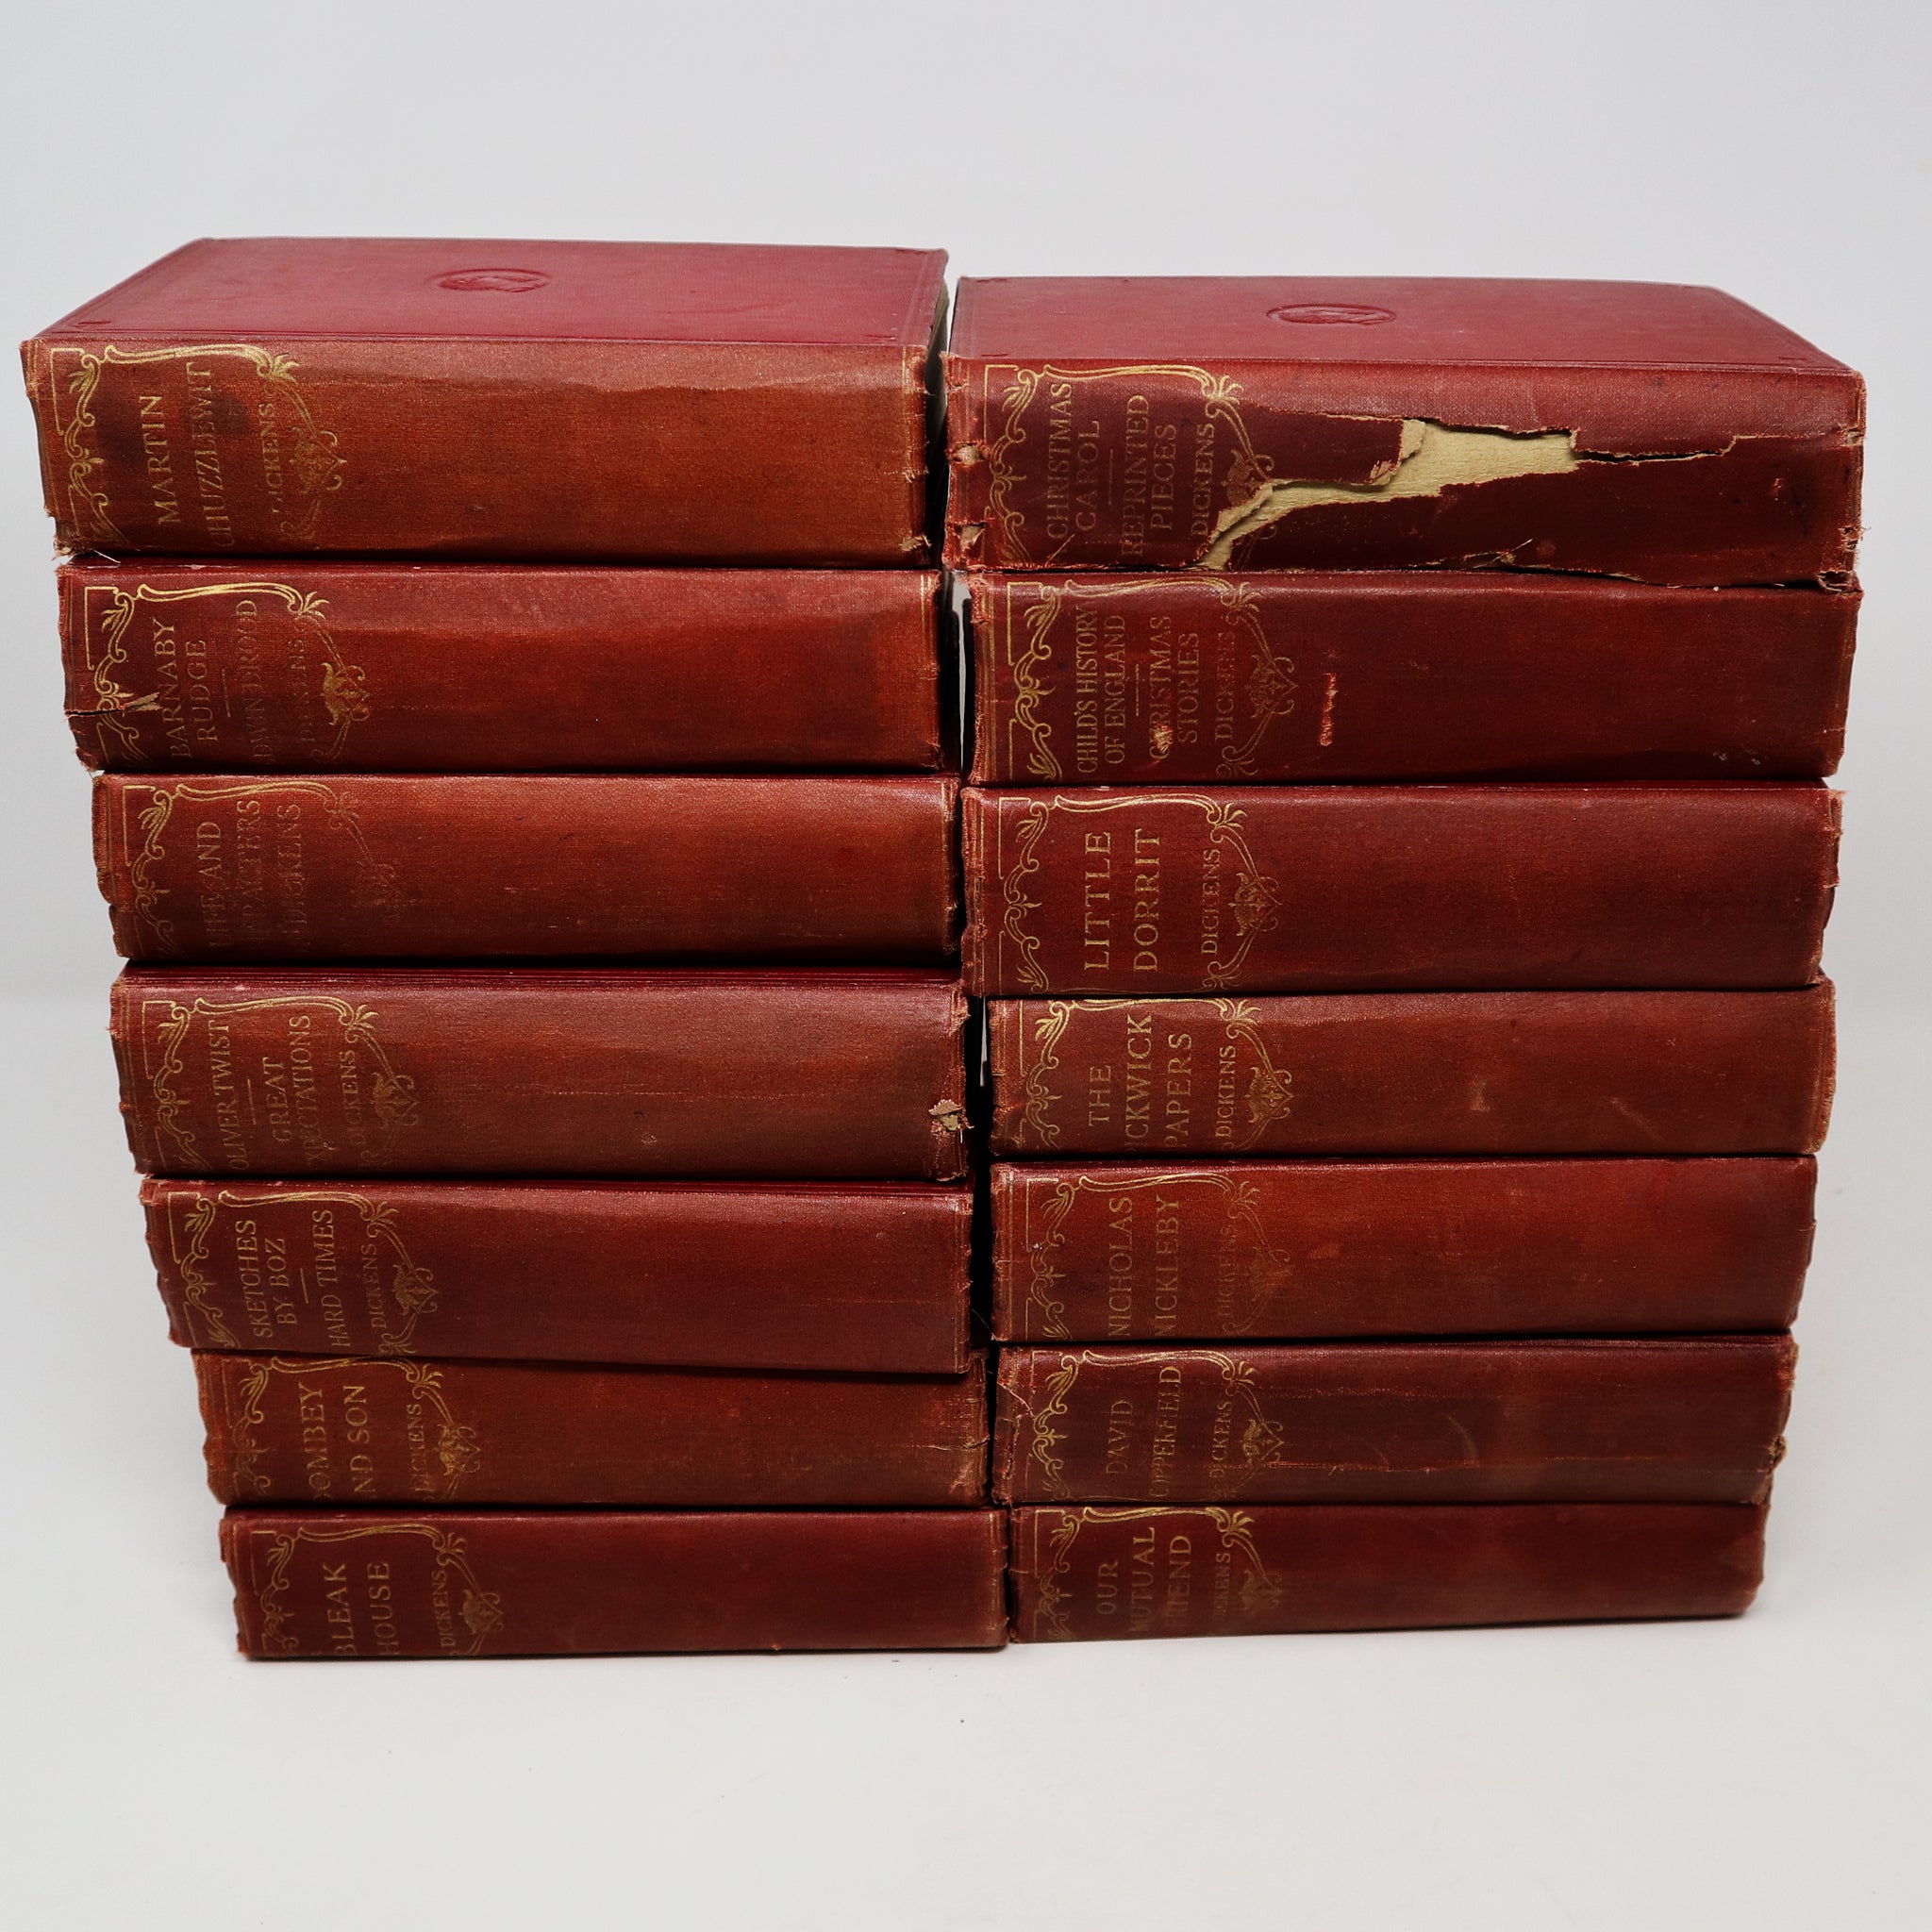 Vintage 1930s Oldhams Press Limited Charles Dickens Hardcover Books Collection Set Of 14 Rare (Inc. A Christmas Carol, Nicholas Nickleby)